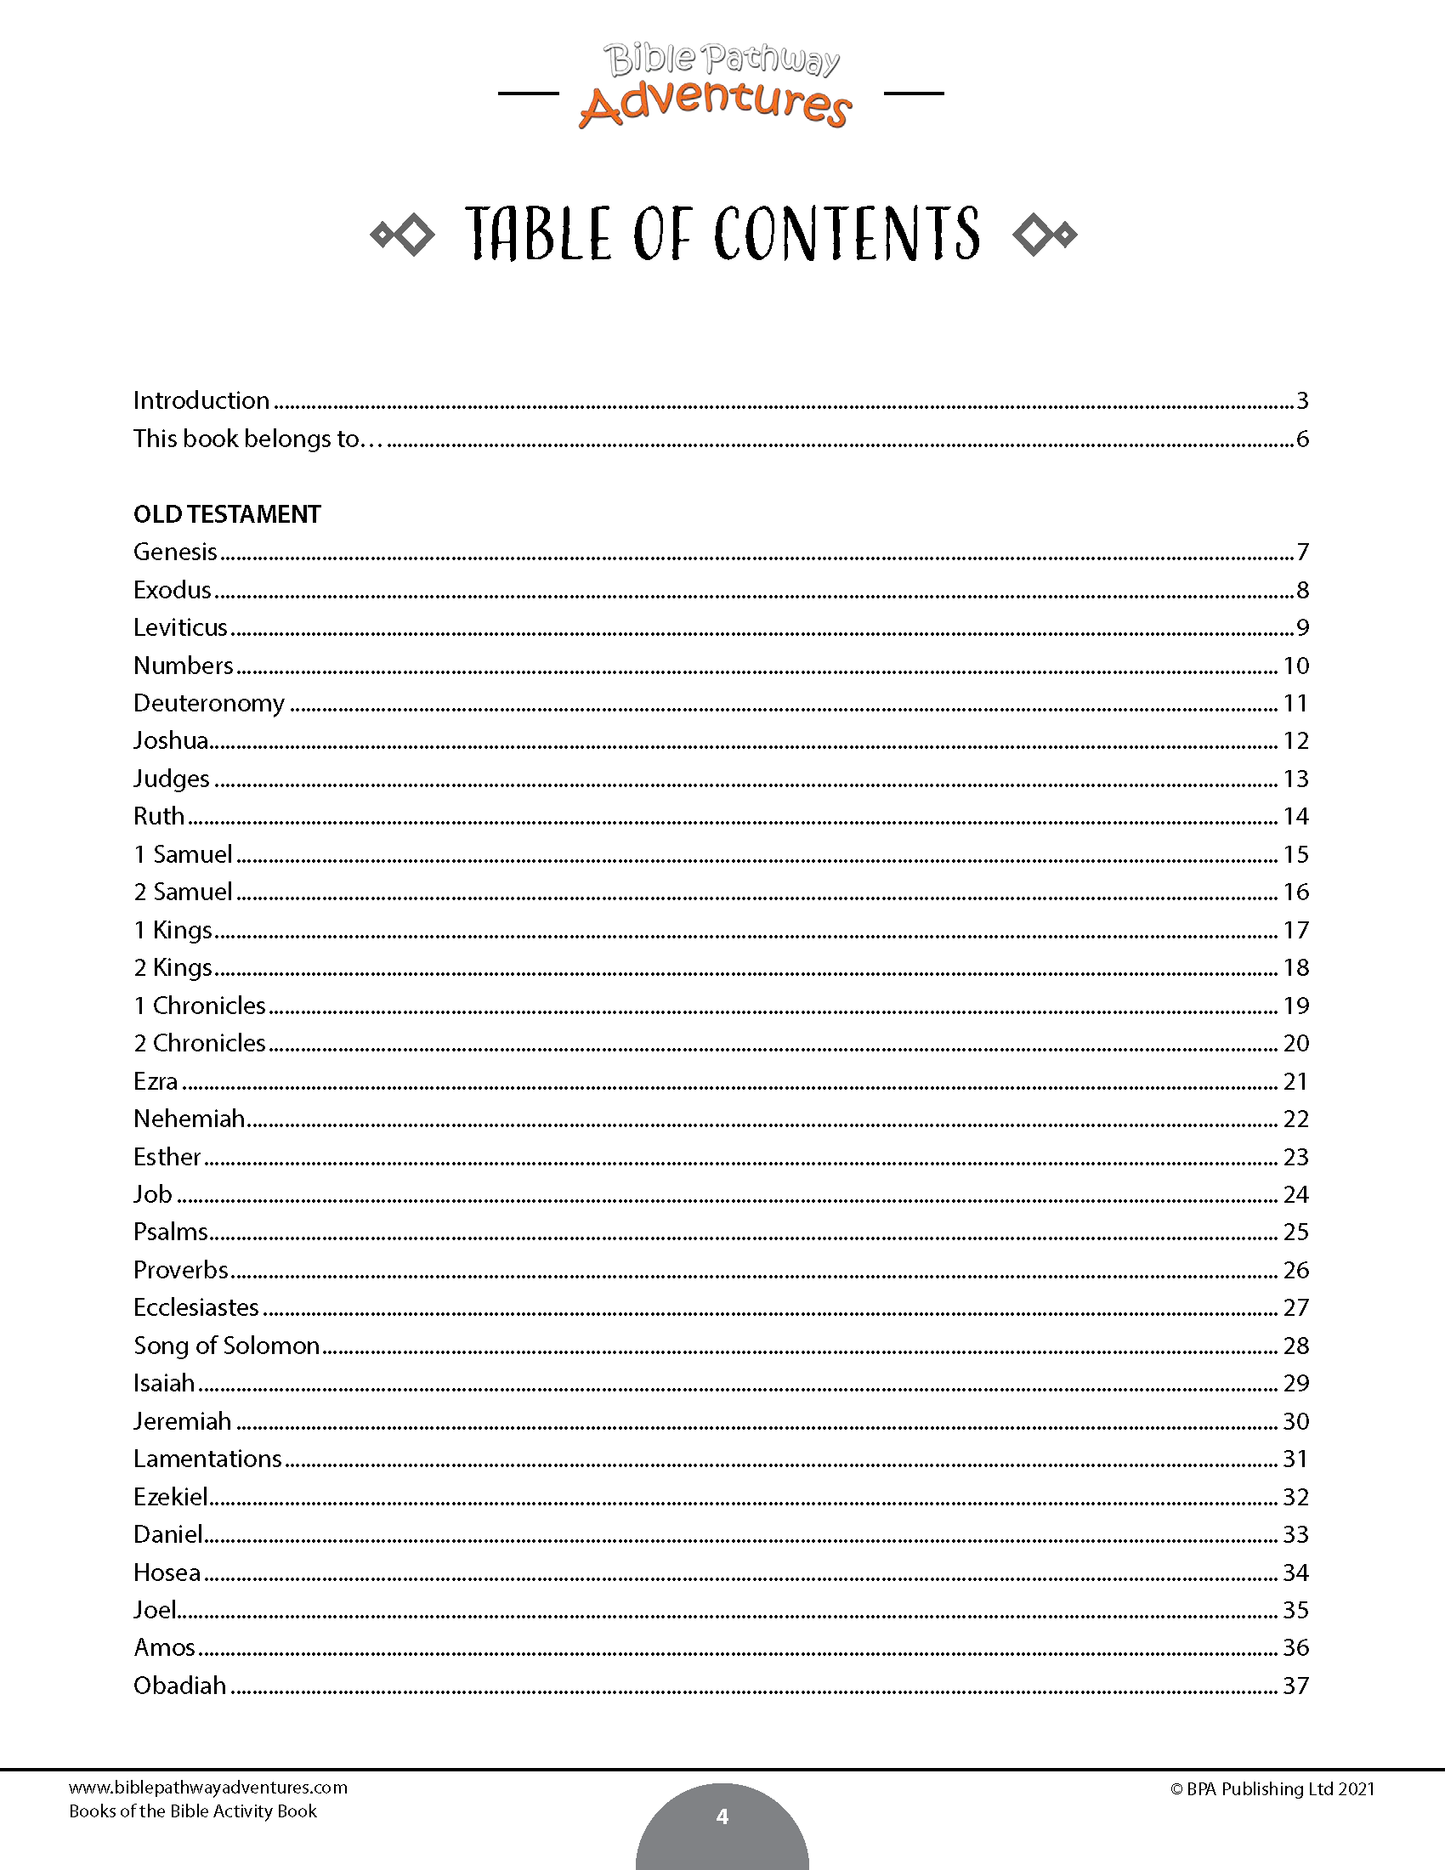 Books of the Bible Activity Book (PDF)